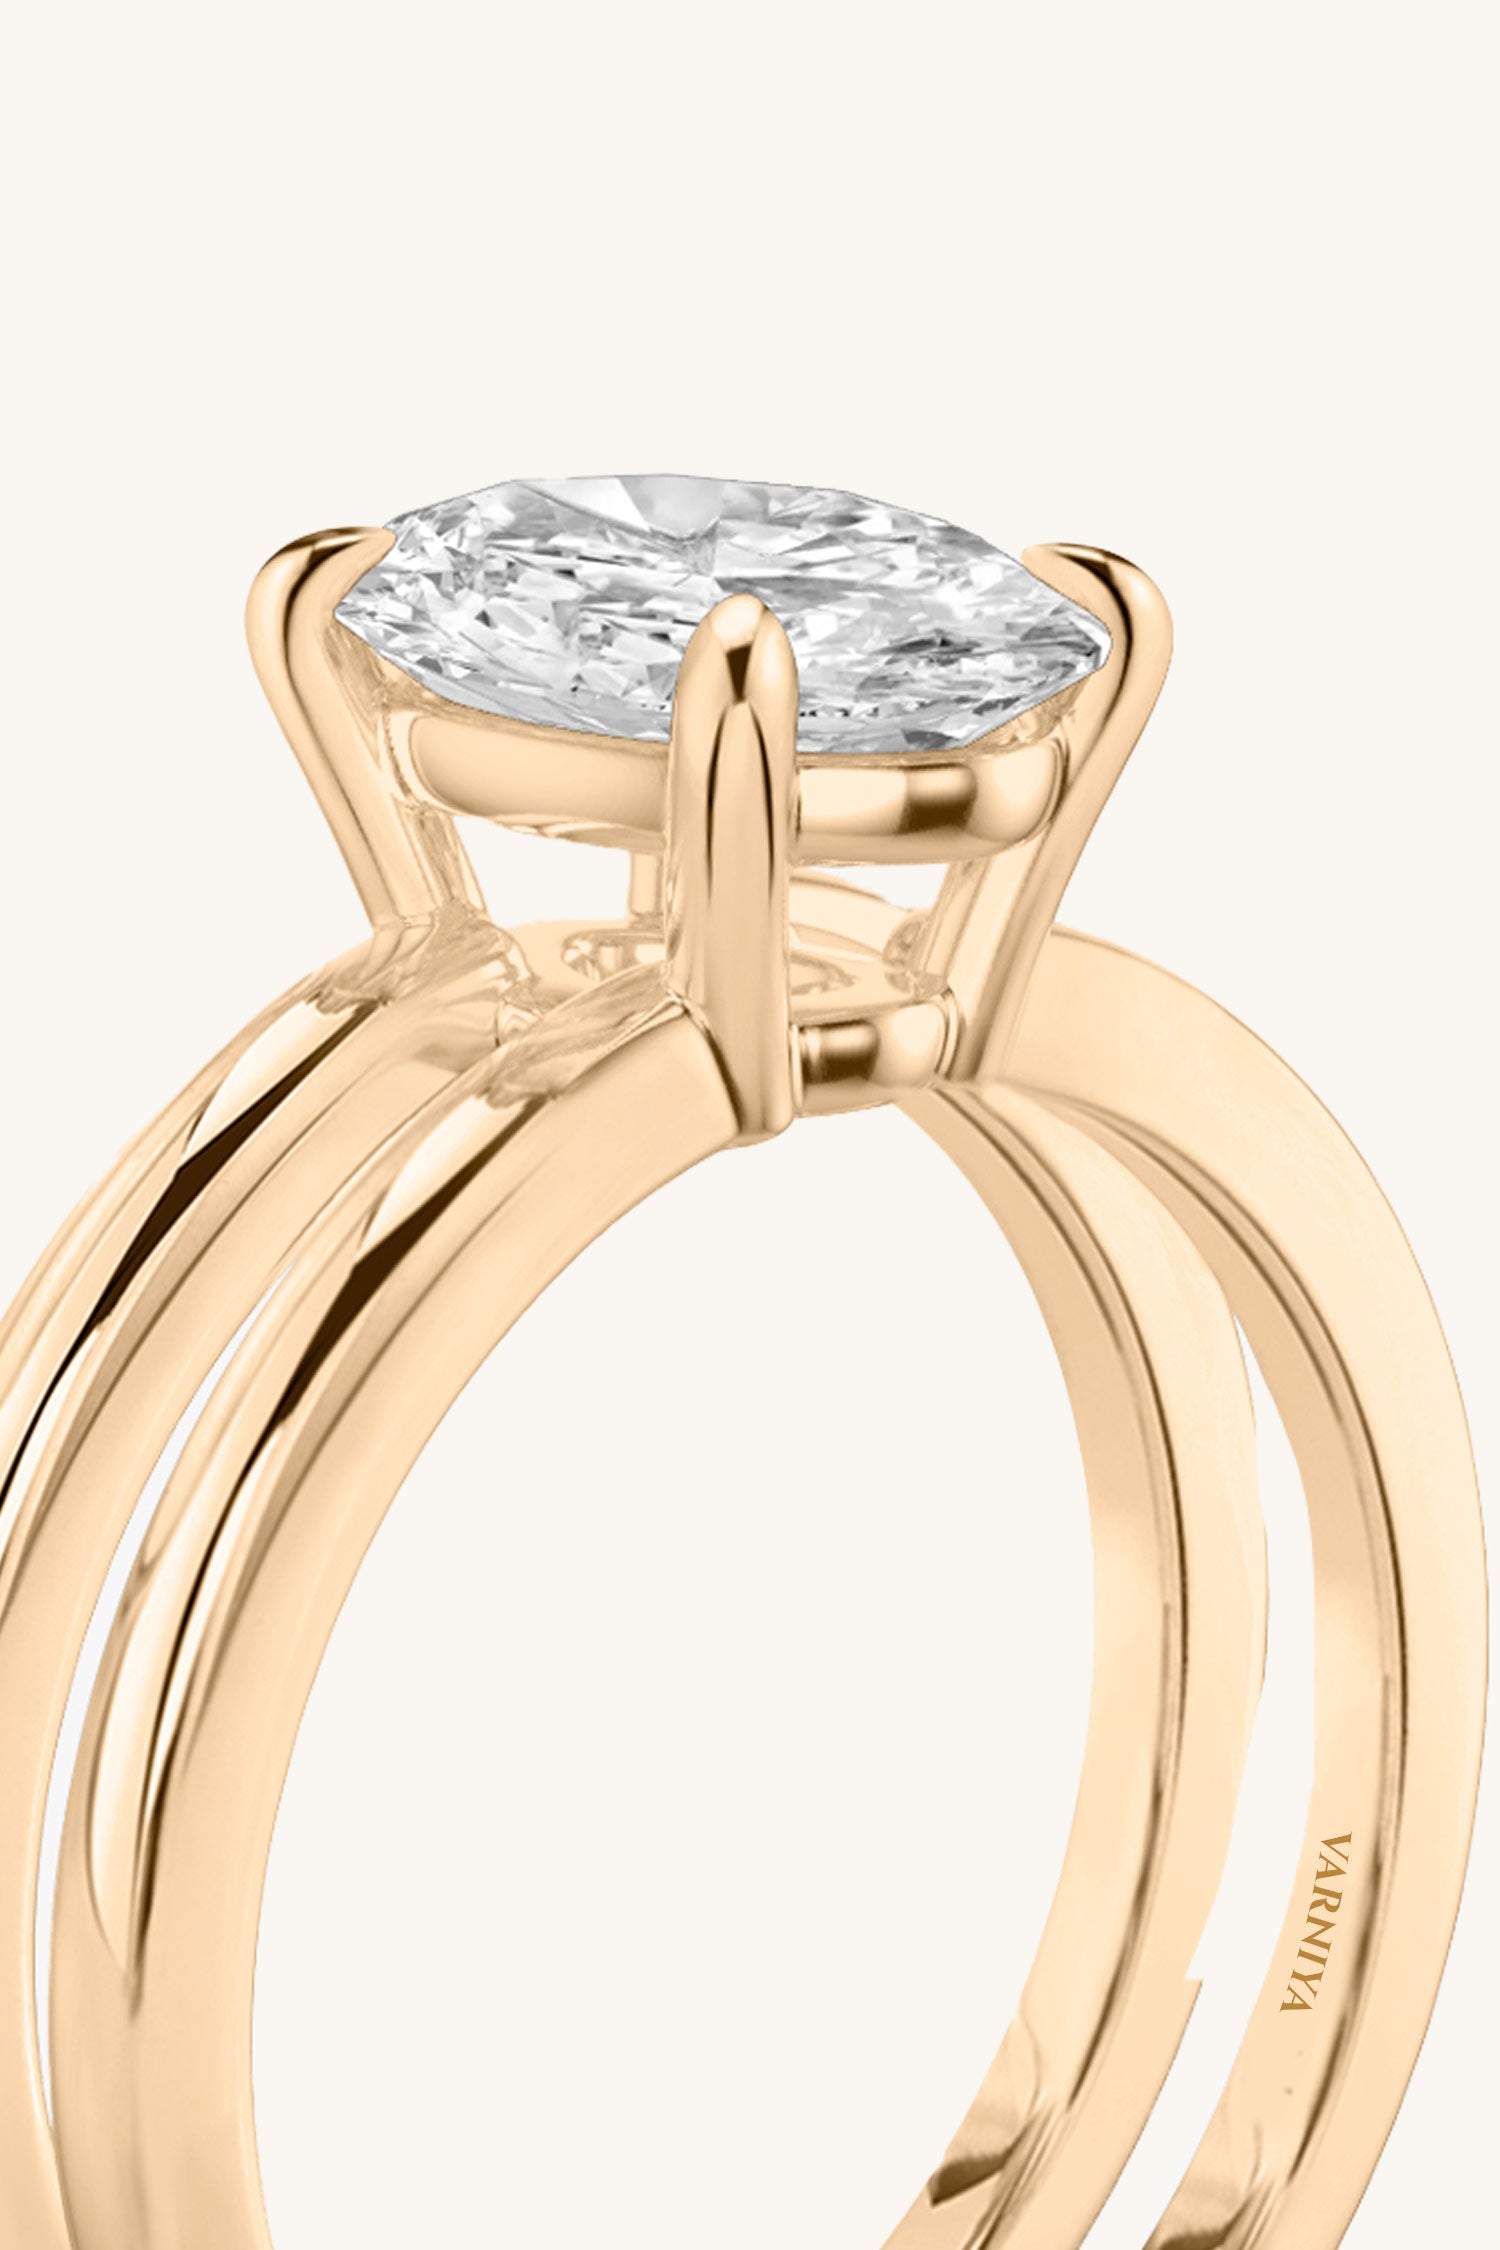 Bicephal Oval Solitaire Ring